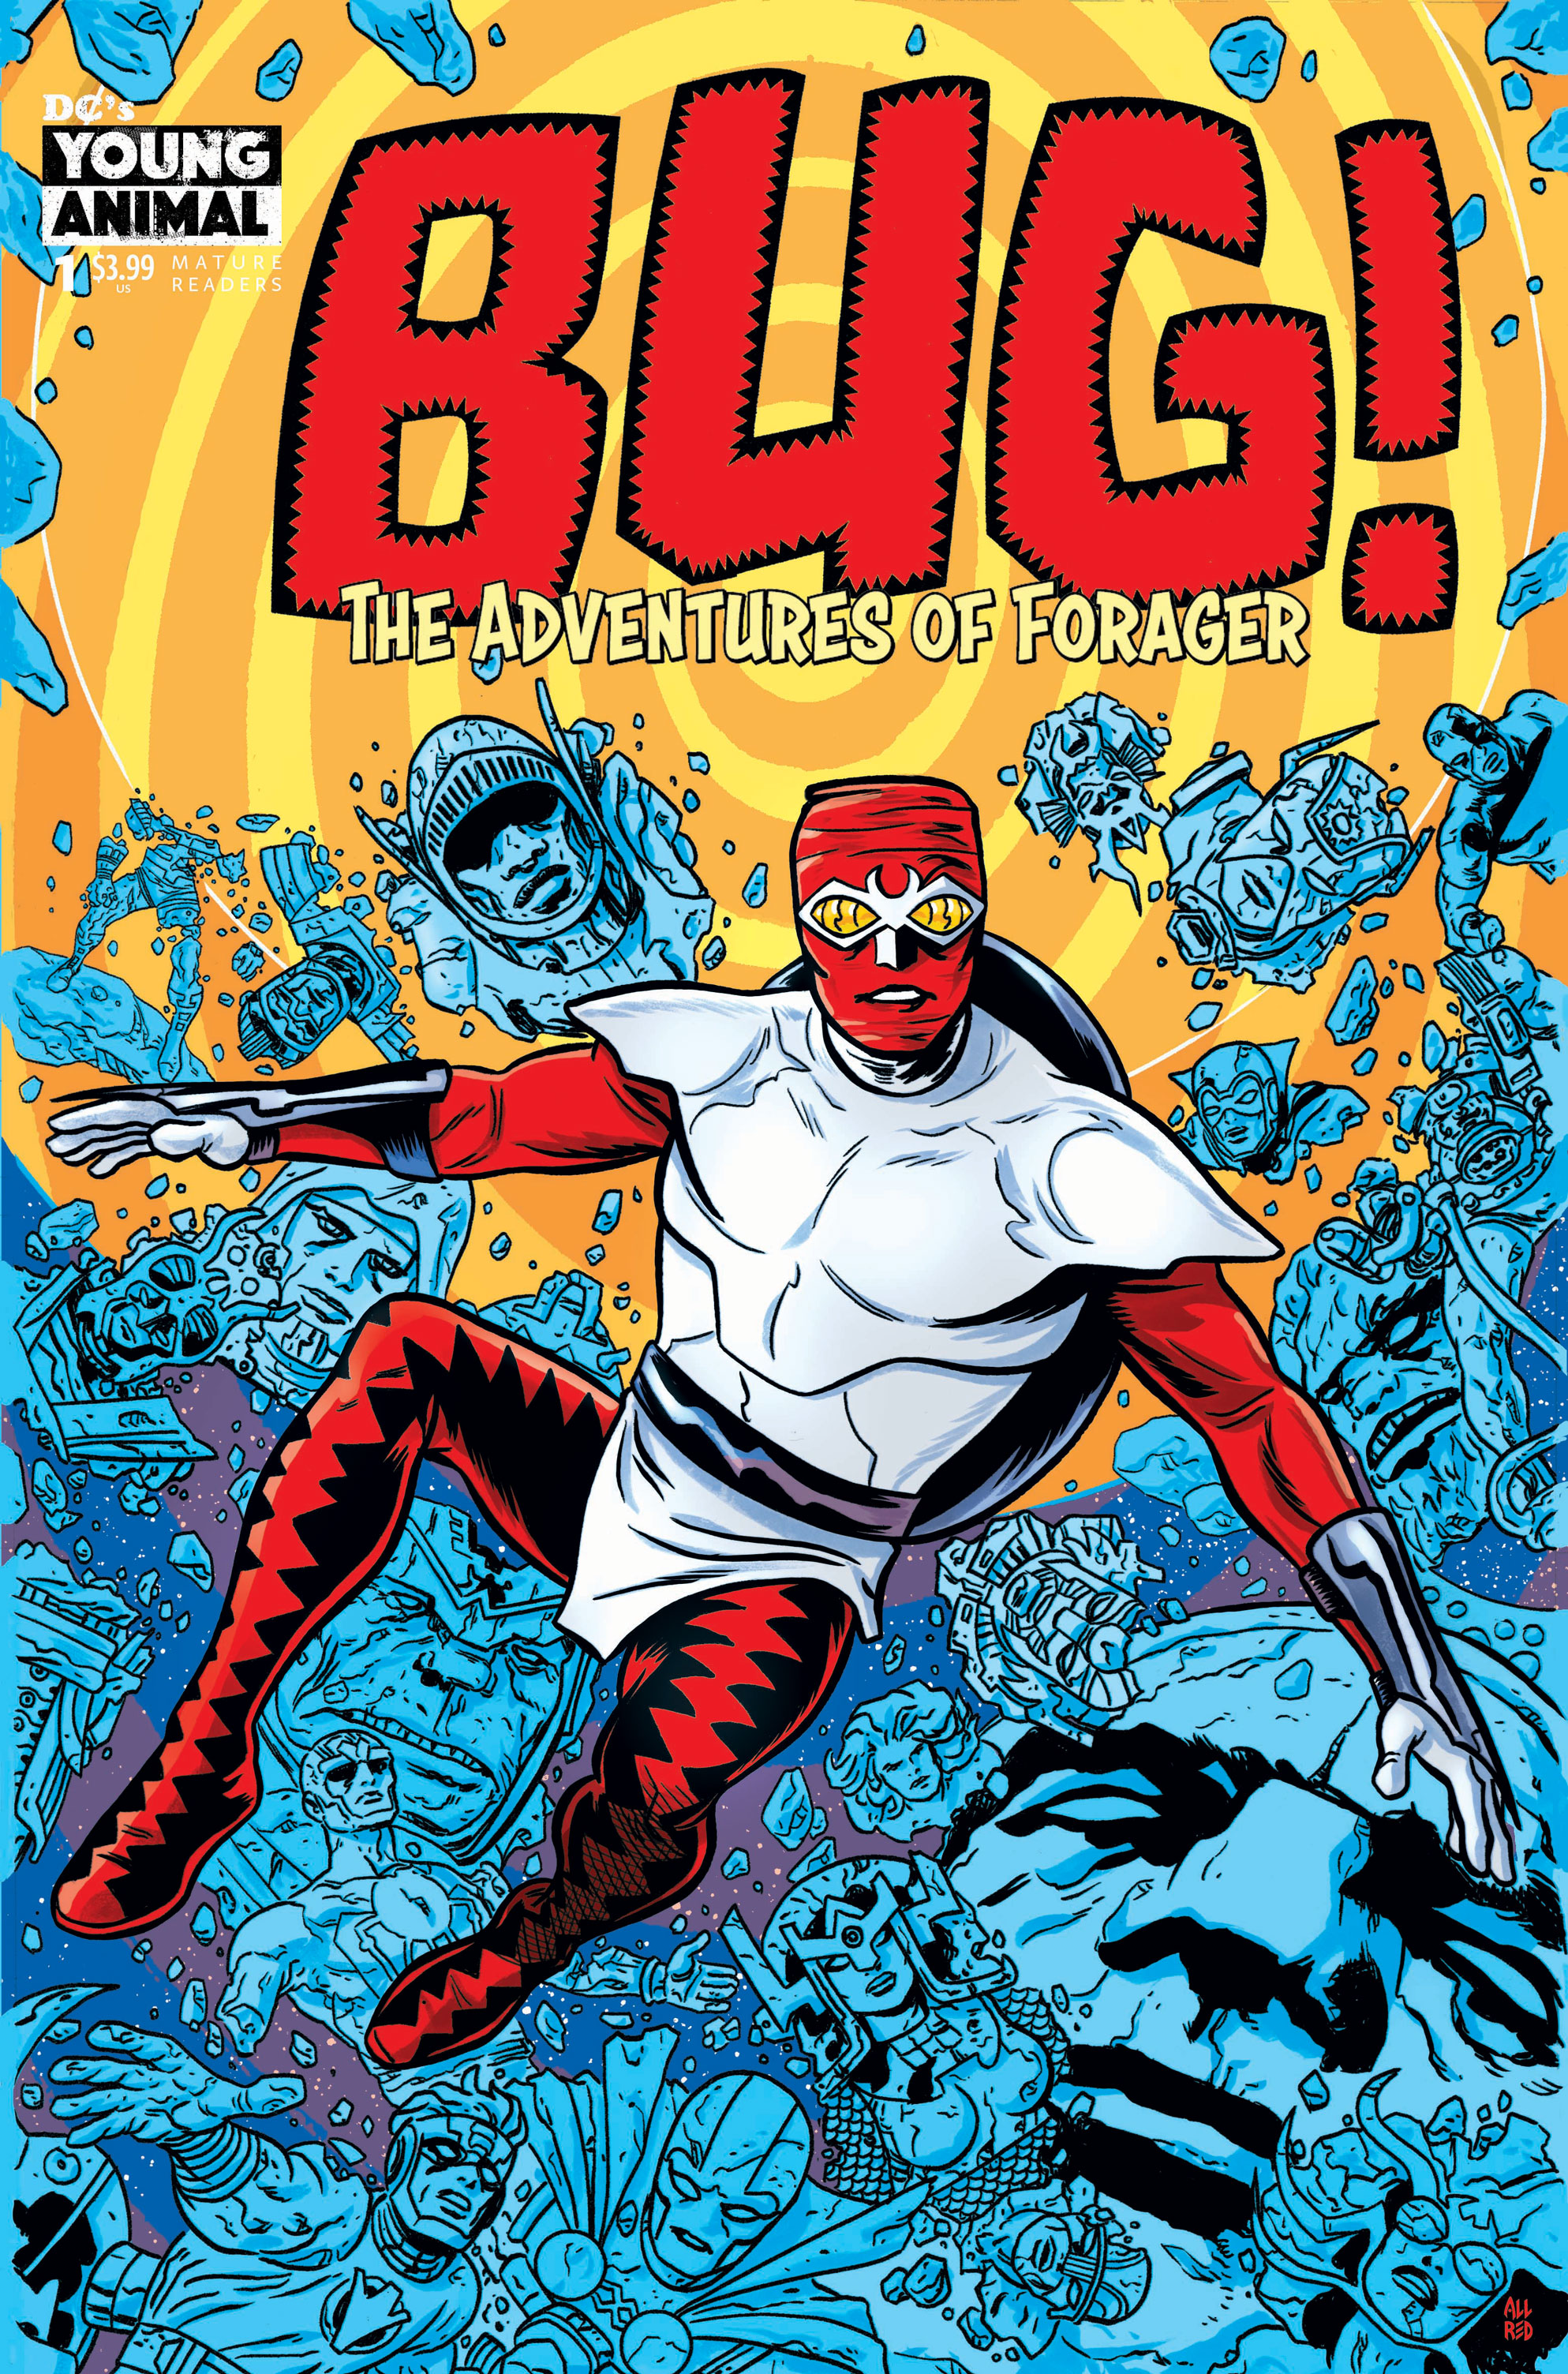 Bug! The Adventures of Forager #1 Review